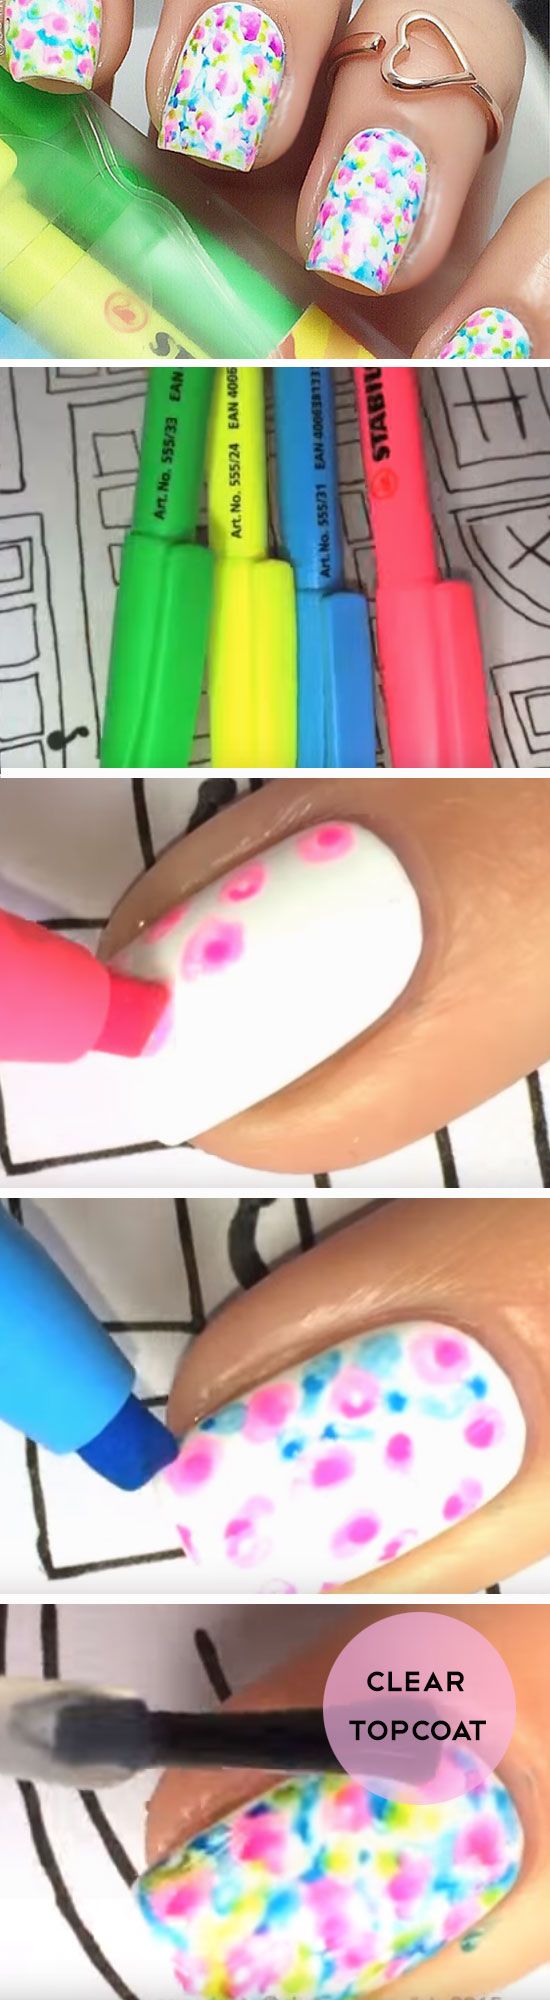 10 Easy Nail Designs You Can Do At Home - Her Style Code